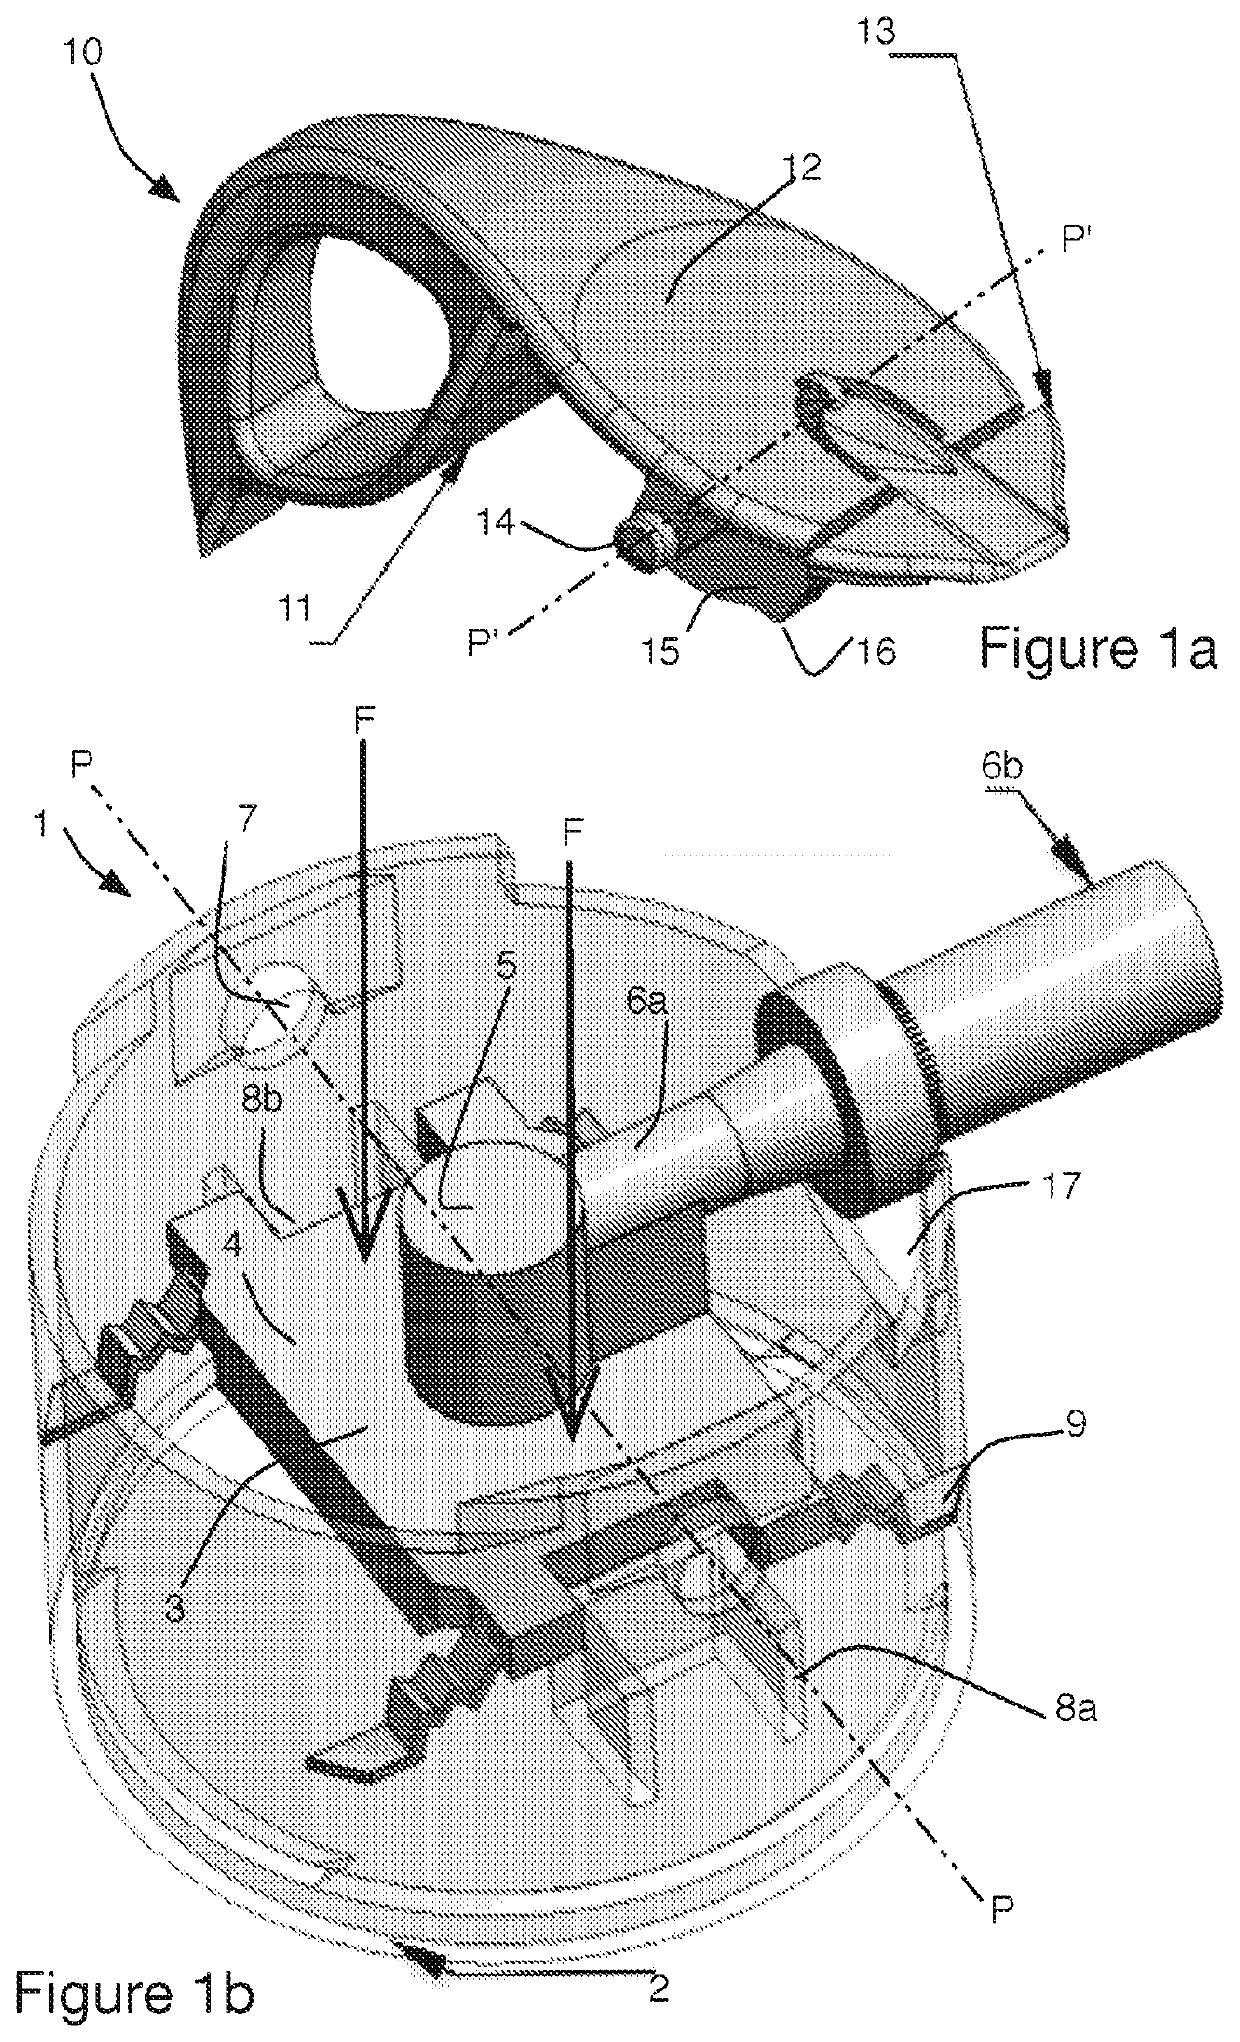 Diffuser assembly for aerosol